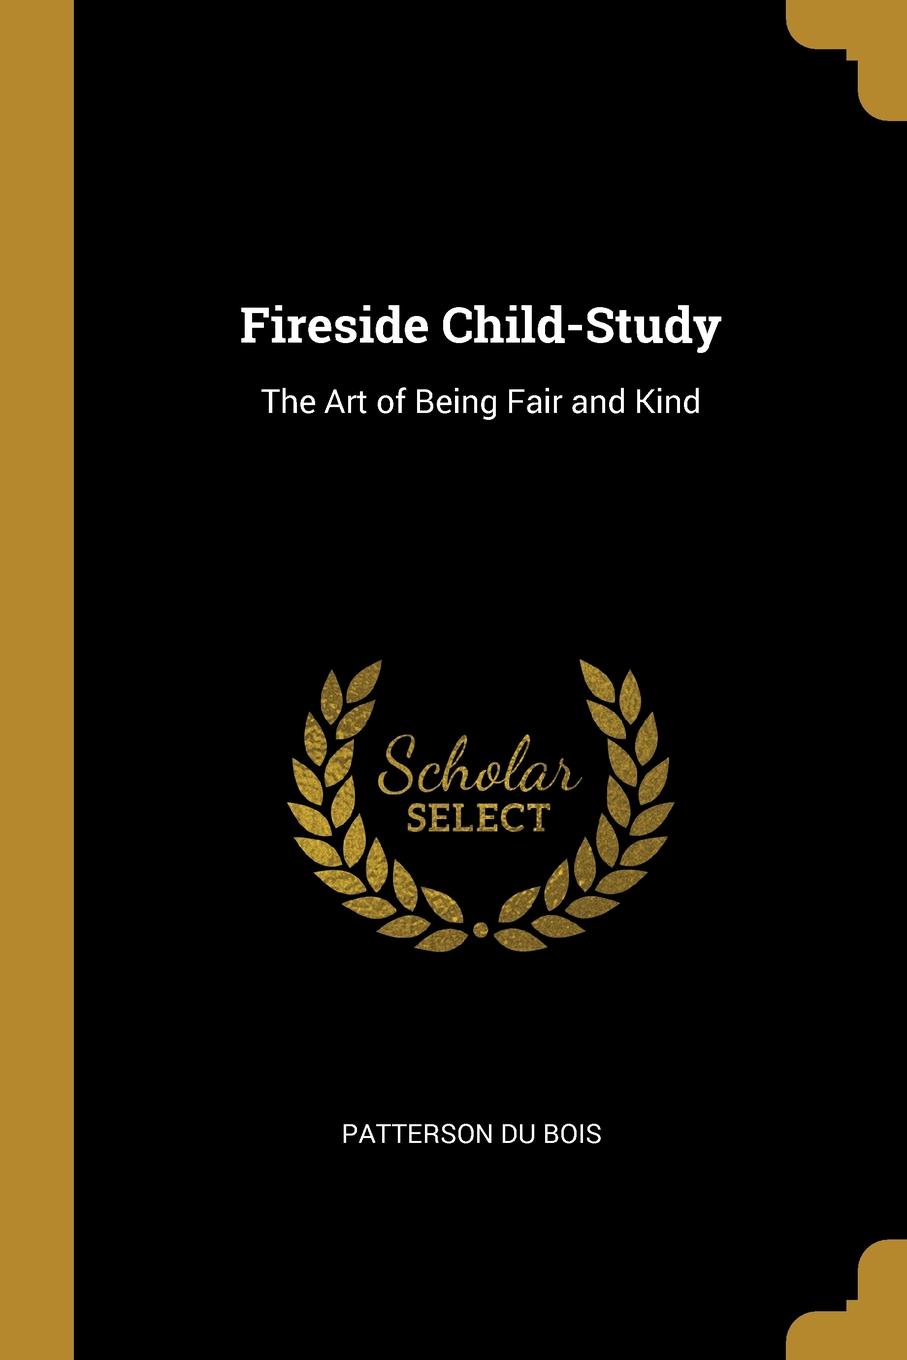 Fireside Child-Study. The Art of Being Fair and Kind